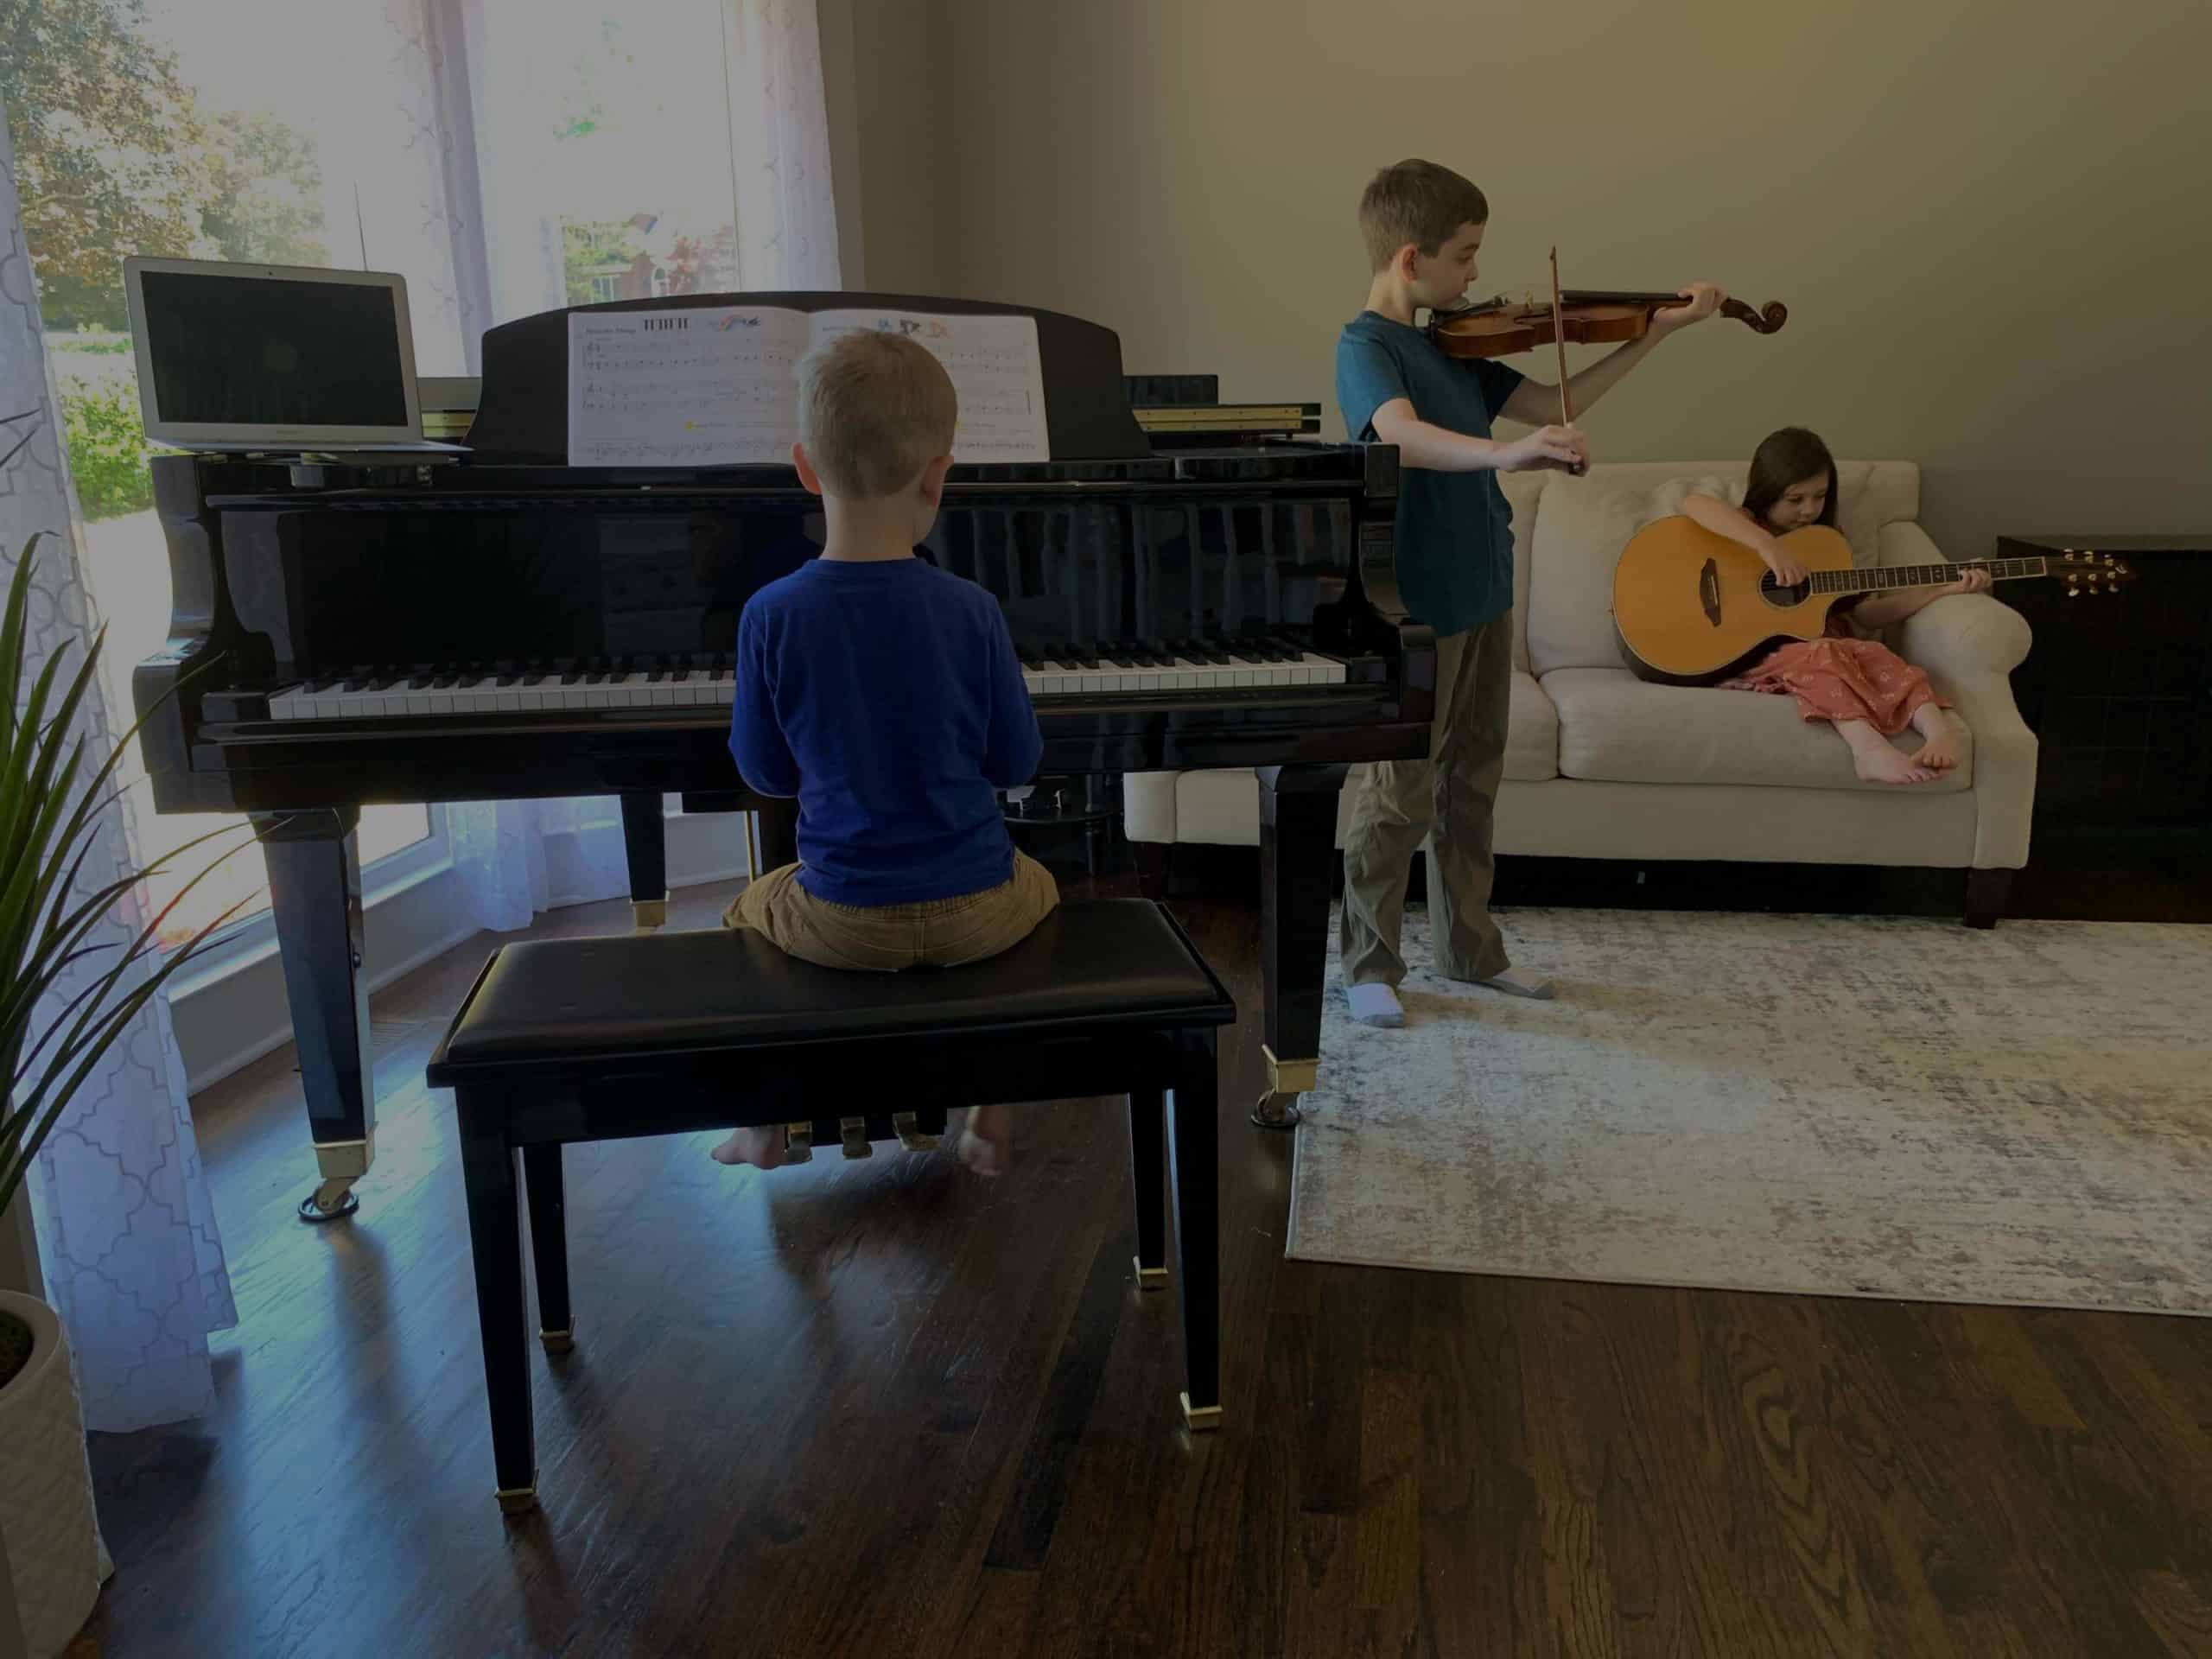 Piano Lessons 4 Children - free online piano and music lessons